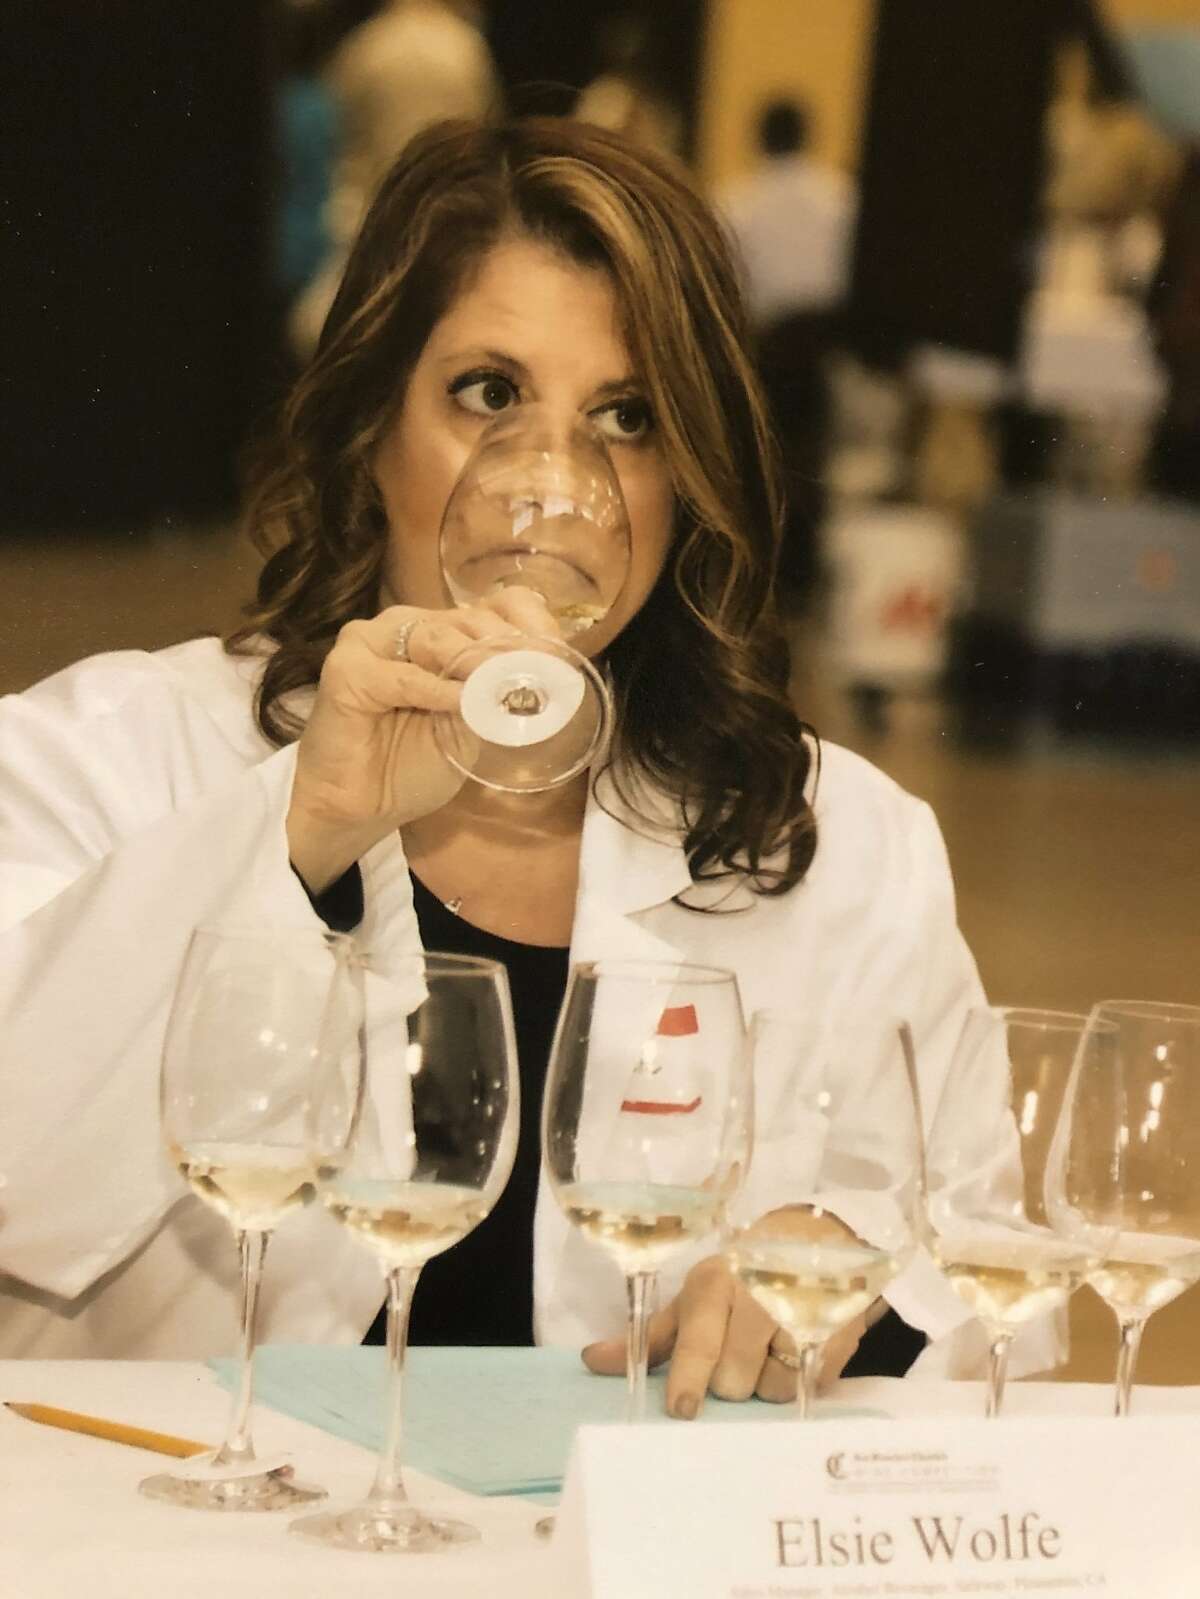 Judge Elsie Wolfe attends numerous industry events each year and is the sales manager of alcoholic beverages for Safeway’s Northern California division.